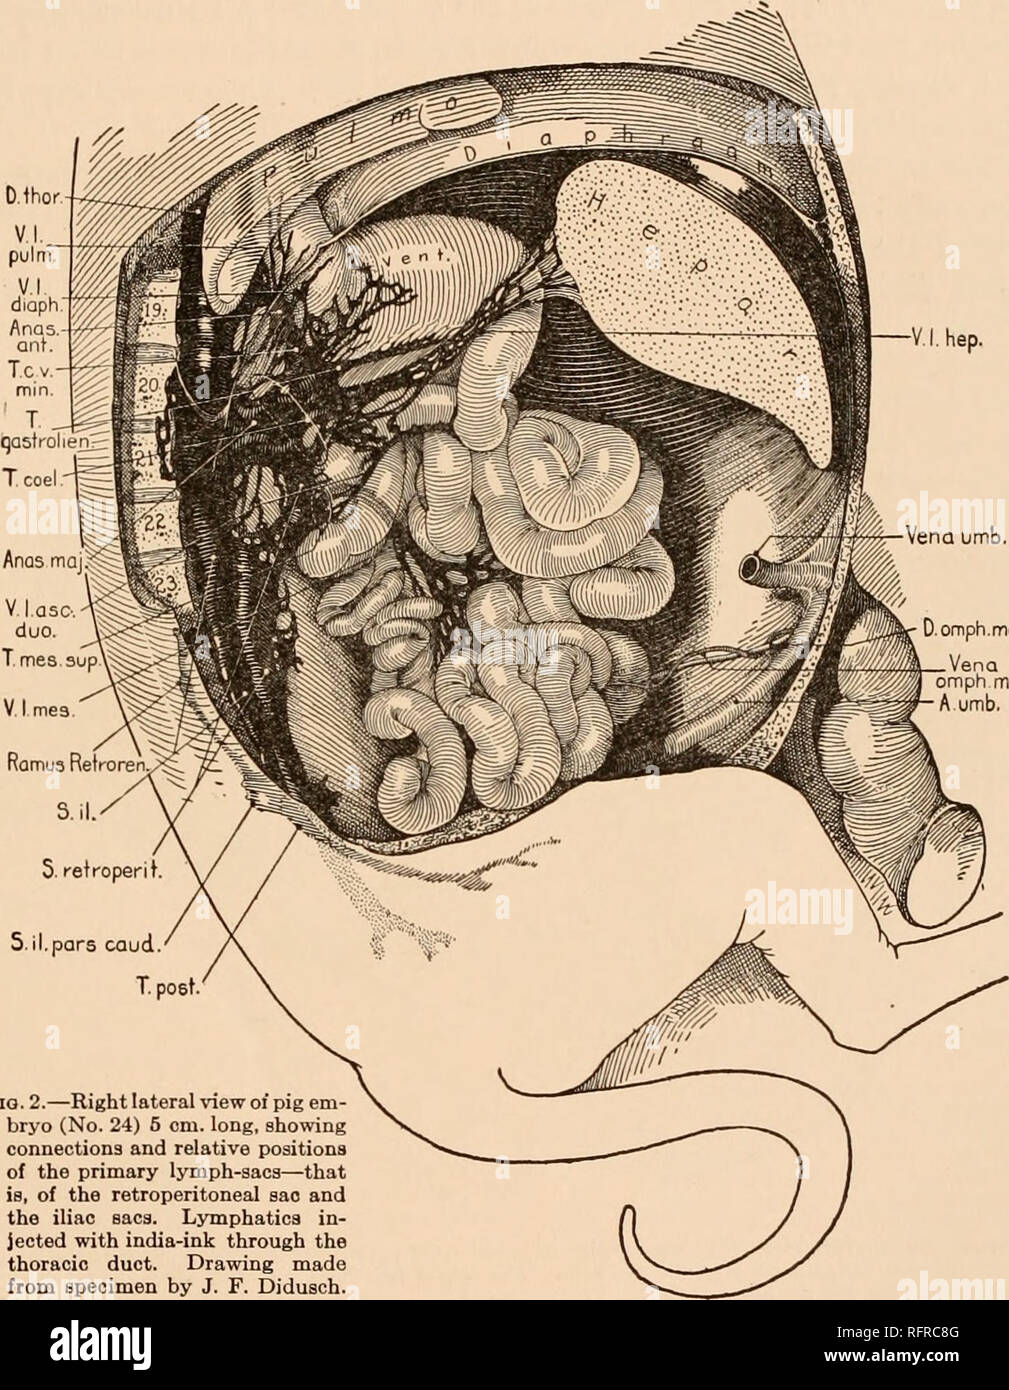 . Carnegie Institution of Washington publication. FATE OP PRIMARY LYMPH-SACS IN ABDOMINAL REGION OF PIG, ETC. 23 first in the form of a film, but in older embryos as distinct vessels) over the adrenal capsule and the anterior pole of the kidney (fig. 3, V. 1. cap. gl. suprar.). As the trunk twines ventrally around the body of the pancreas, lymphatics are given off to the middle portion of that organ. These pancreatic vessels are not shown in figure 3, but would come off in front of the lower portion of the trunk of the lesser curvature (T. c. V. min.). Laterally, vessels pass from the mesial t Stock Photo